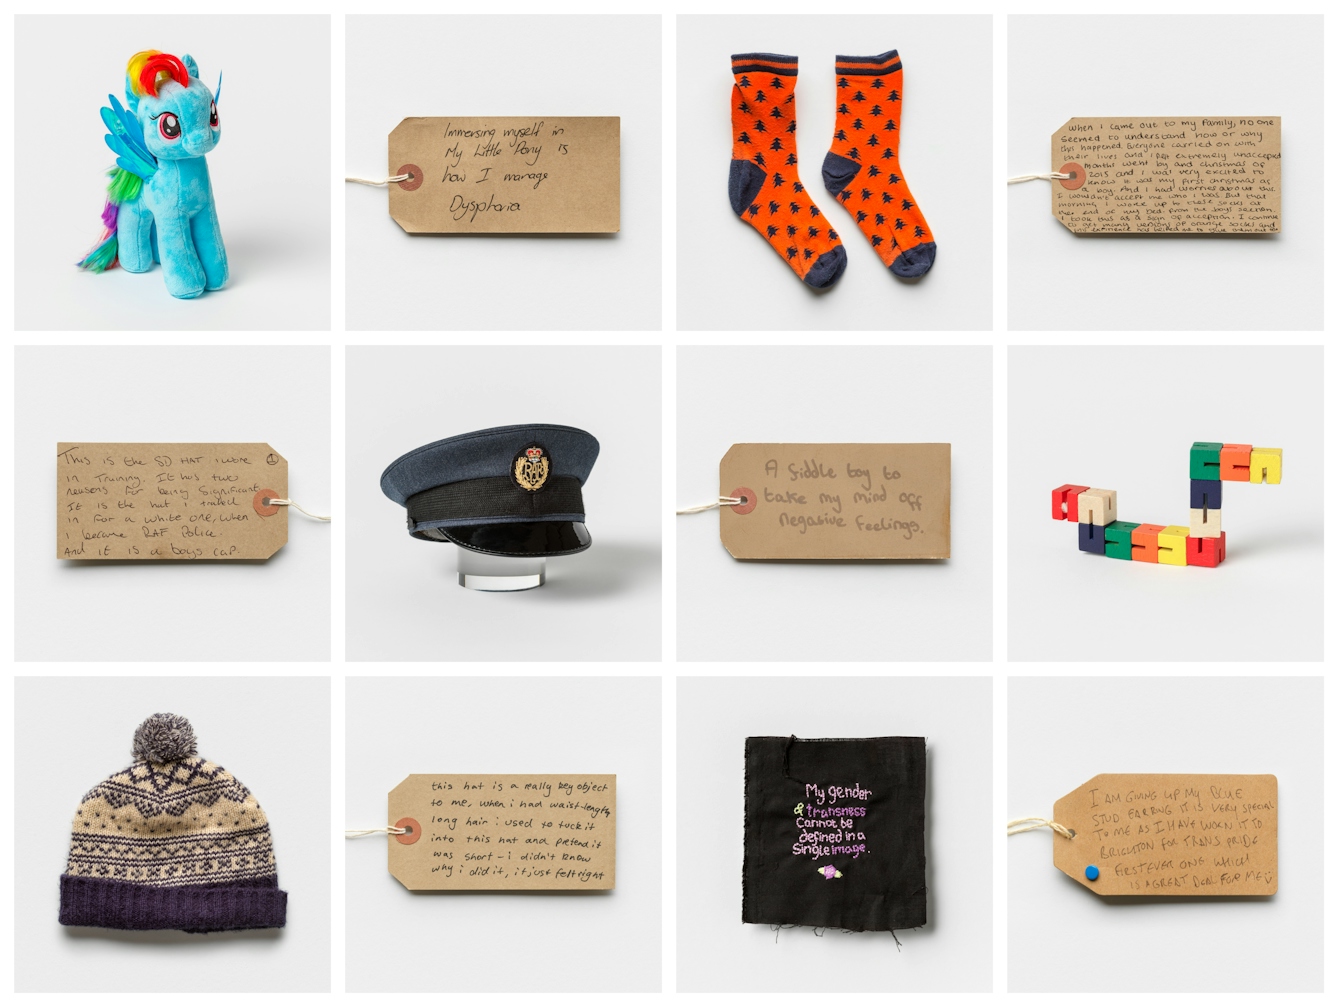 Grid of 12 square photographic images, 4 across and 3 down. The images alternate between a photograph of a brown parcel label complete with string tie and a photograph of an object. On the labels are handwritten messages.  The objects pictured consist of a soft toy pony, a pair of orange socks, a pilot's cap, a wooden coloured puzzle, a wooly hat and a small embroidered square of material.